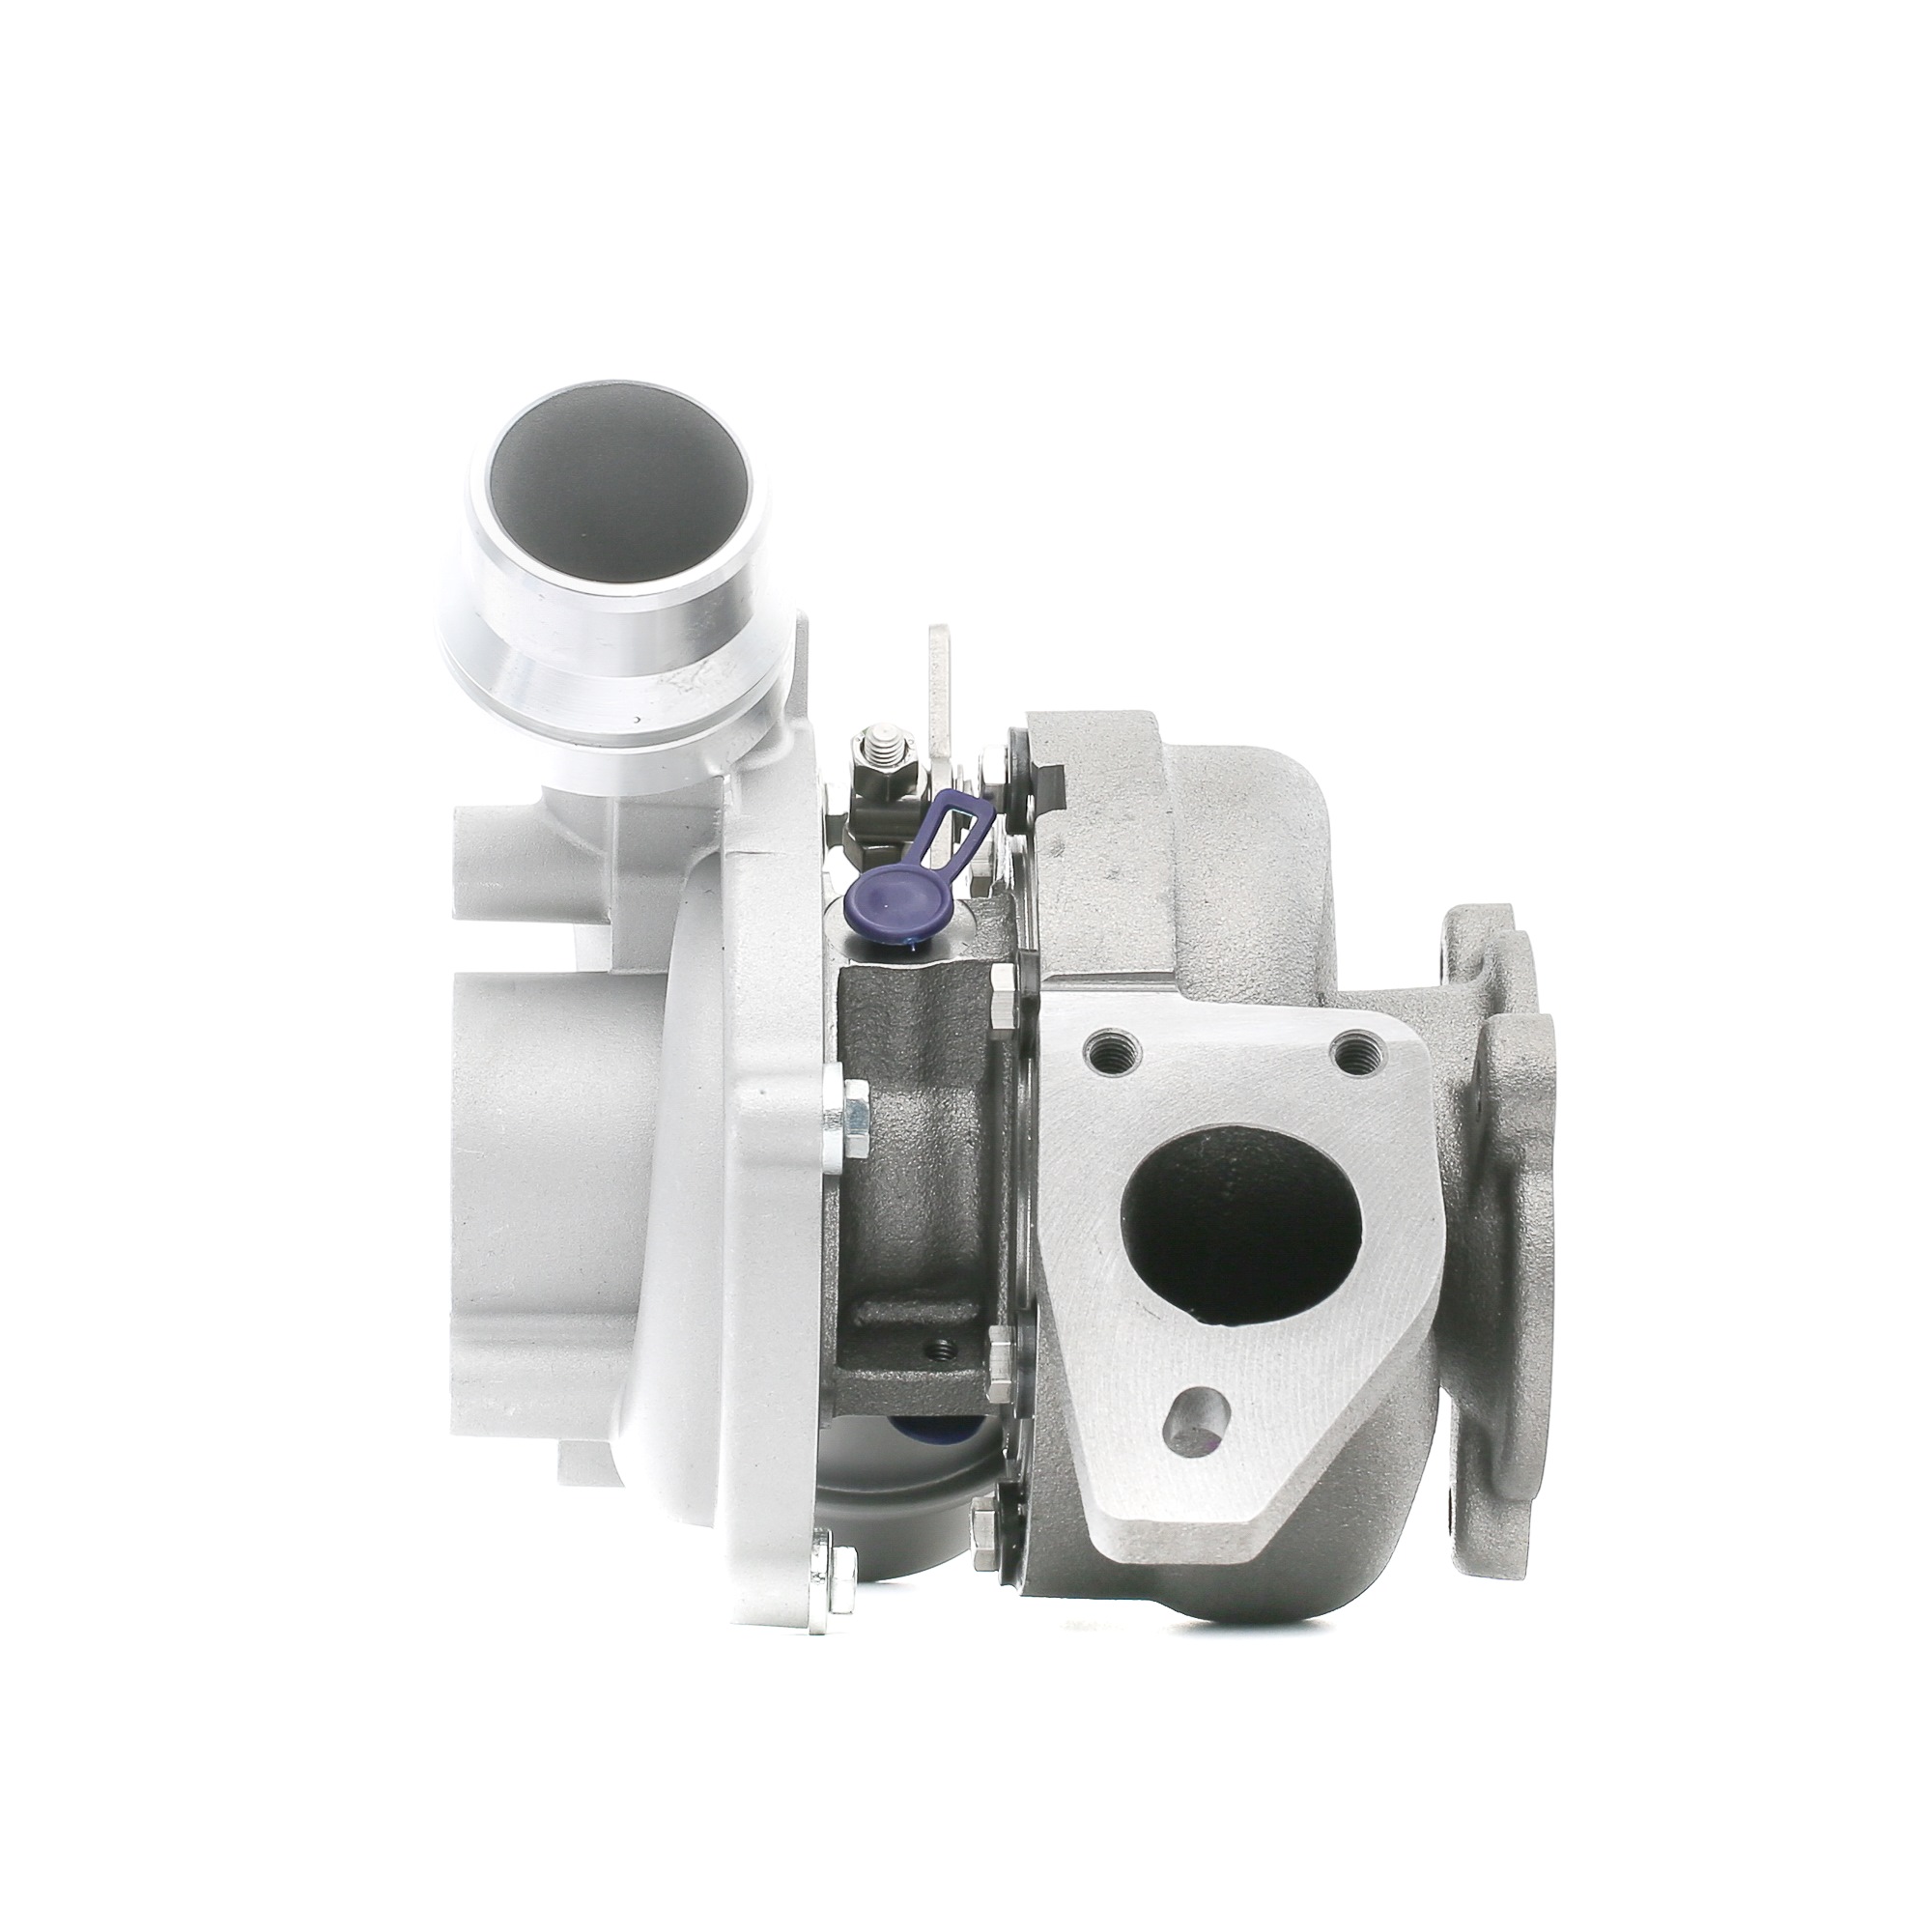 STARK SKCT-1190116 Turbocharger Exhaust Turbocharger, Euro 5, without attachment material